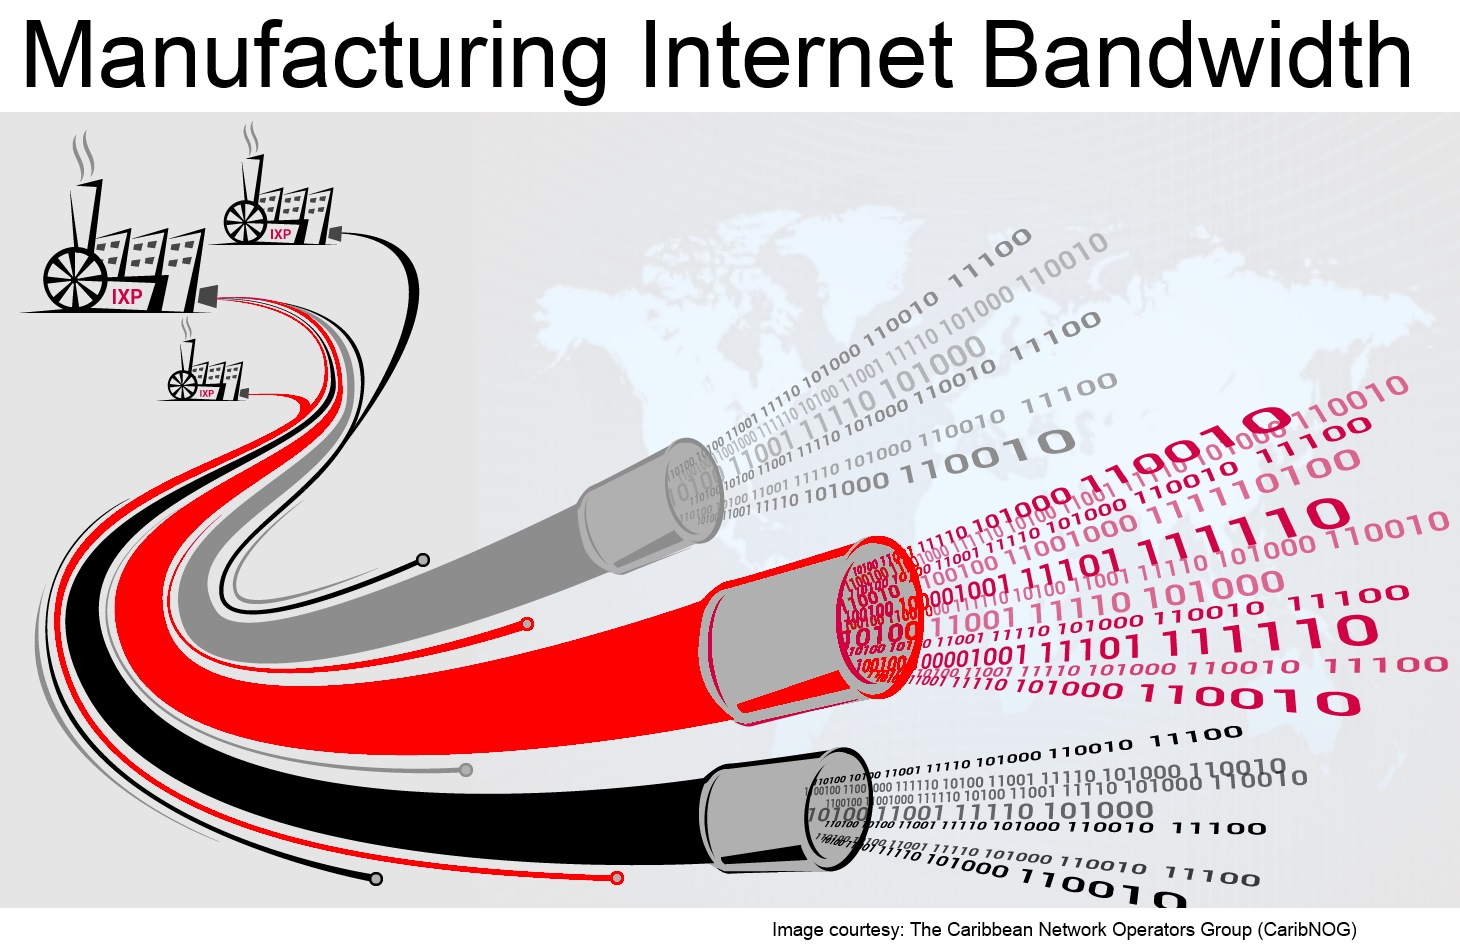 bandwidth is important for internet speed